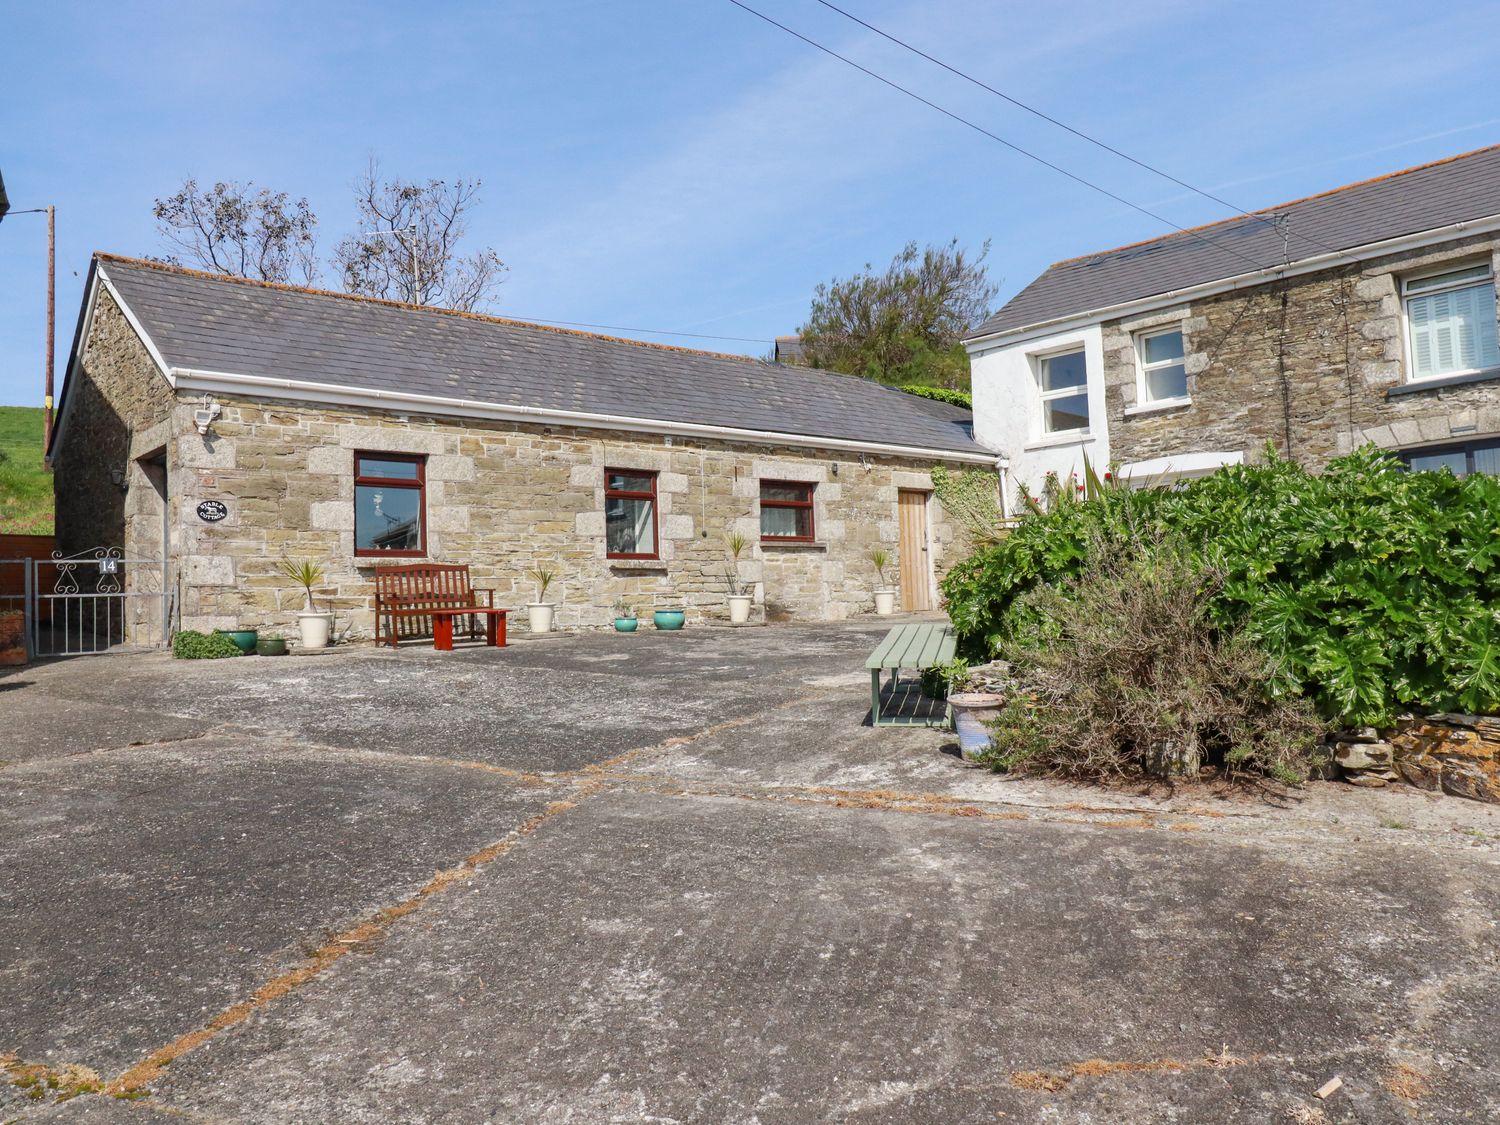 Stable Cottage - Cornwall - 931711 - photo 1